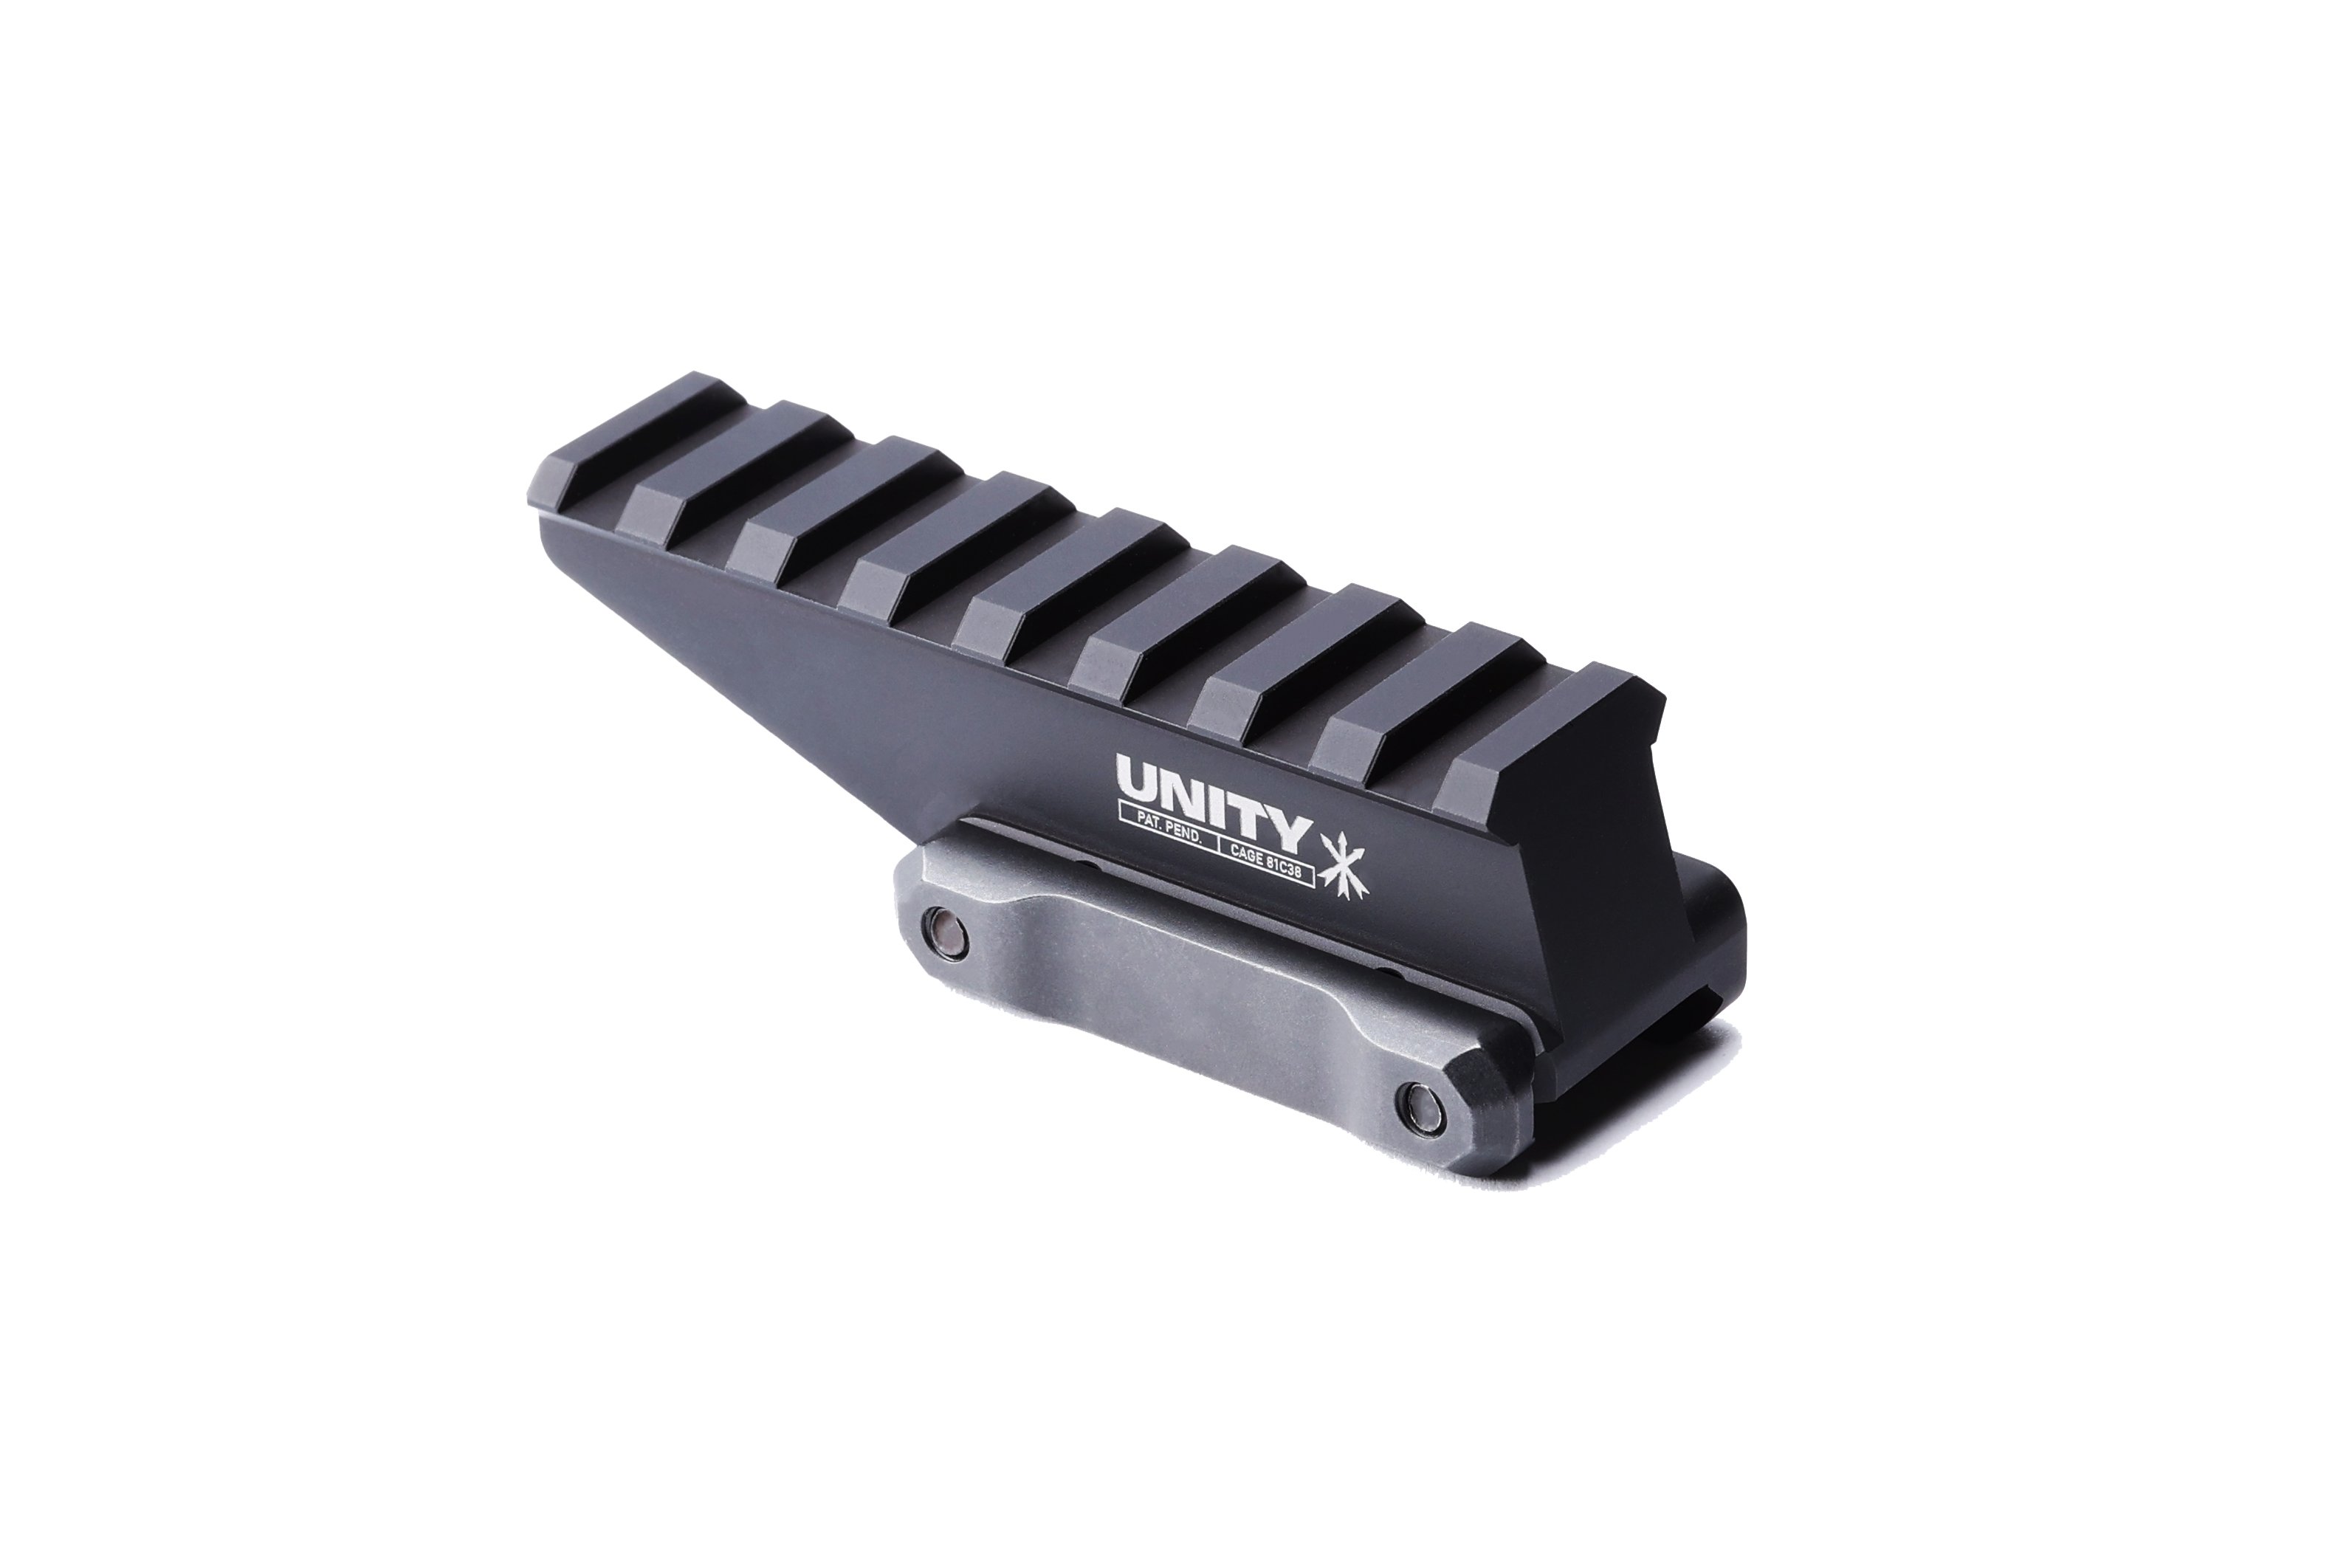 UNITY TACTICAL - F.A.S.T. RISER ABSOLUTE MOUNT SYSTEM